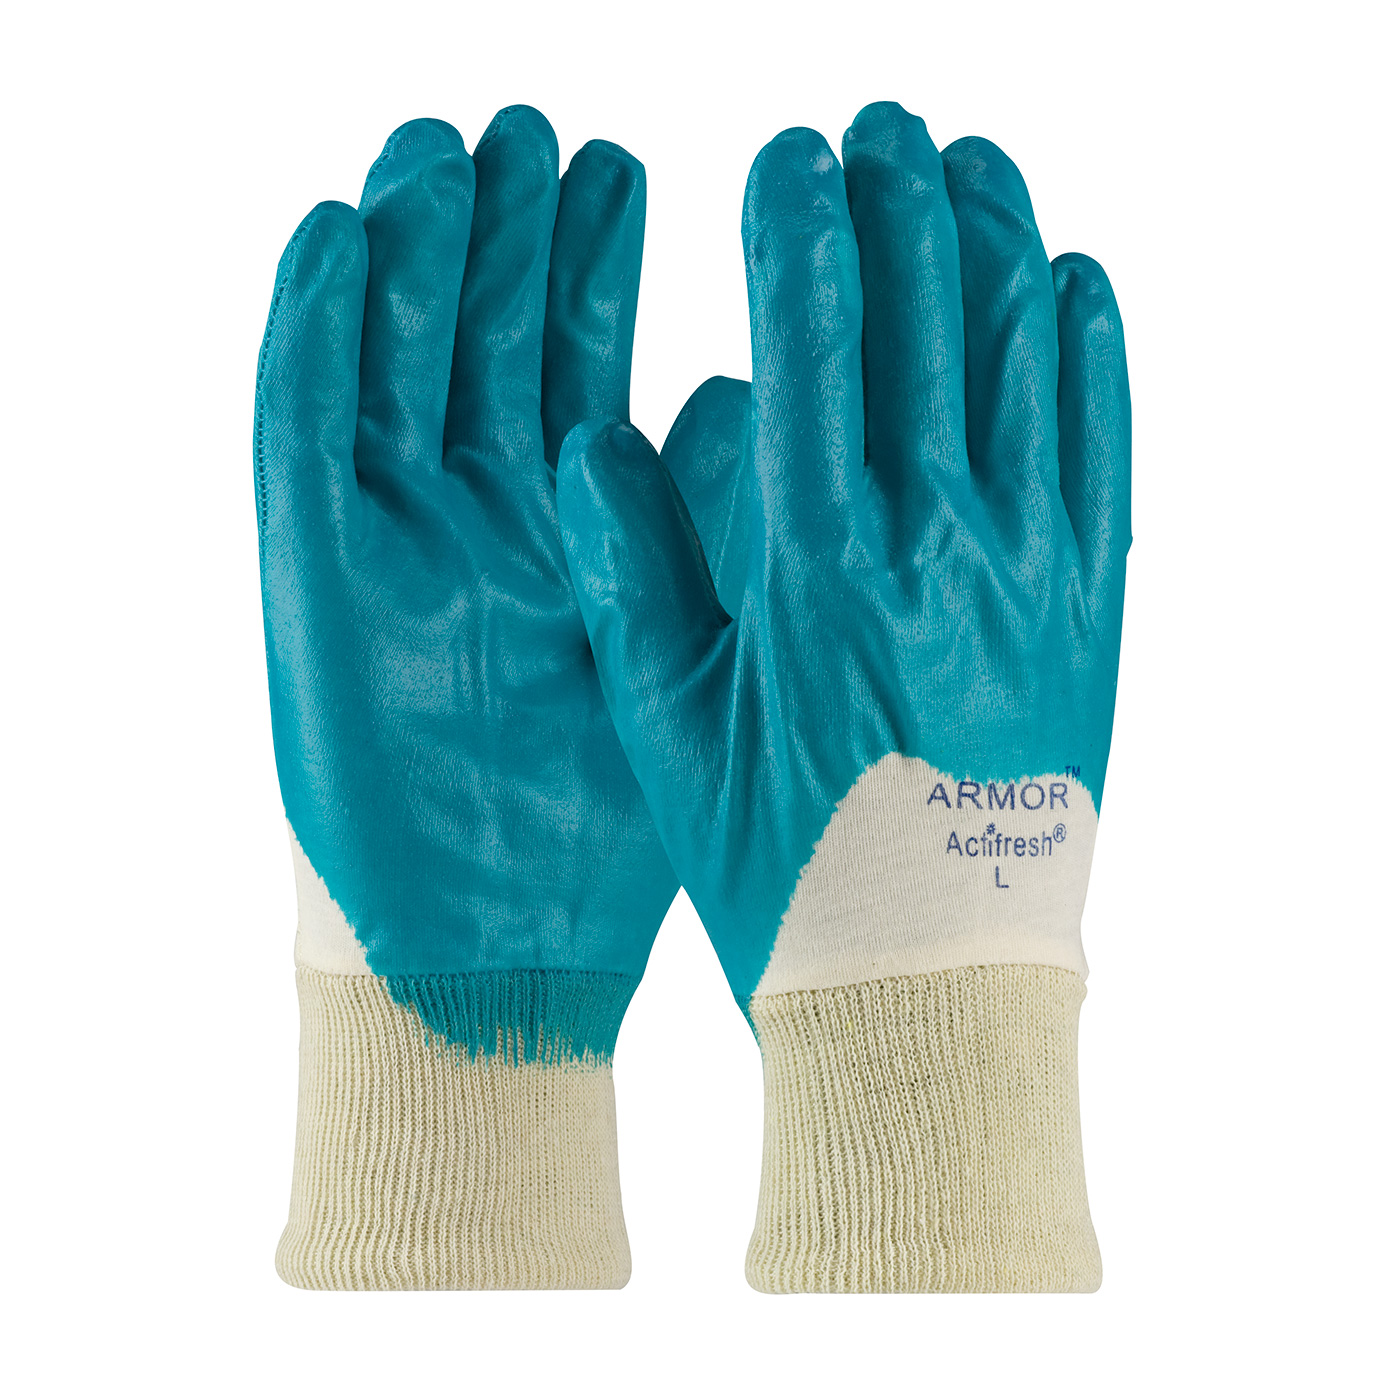 56-3180 PIP® ArmorLite® Nitrile Dipped Glove with Interlock Liner and Smooth Finish on Fingers, Palm and Knuckles has a Knit Cuff